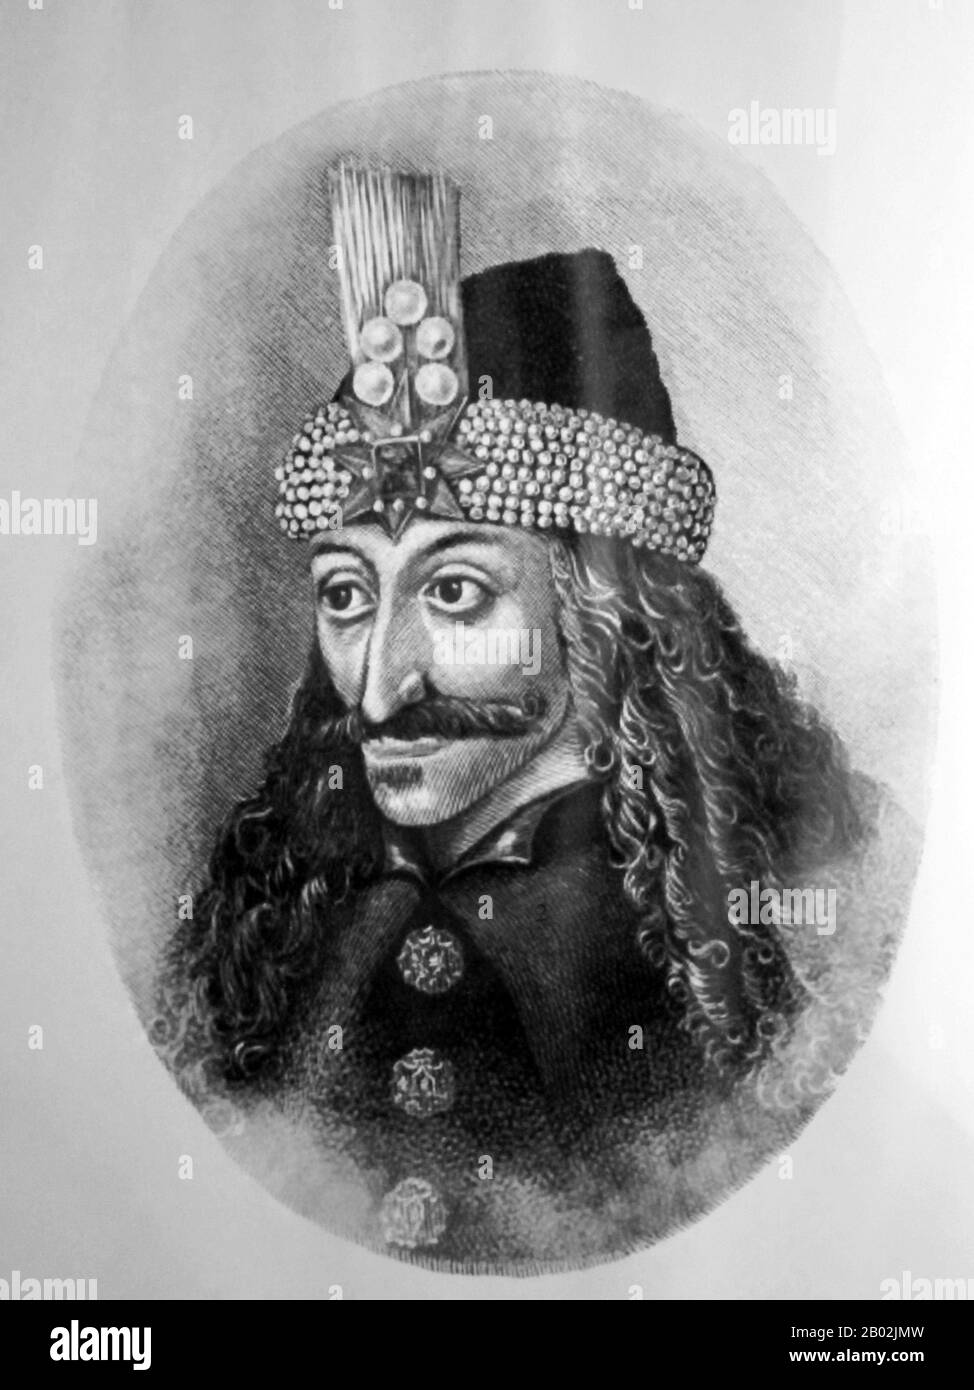 Vlad III, Prince of Wallachia (1431–1476/77), was a member of the House of Drăculești, a branch of the House of Basarab, also known, using his patronymic, as (Vlad) Drăculea or (Vlad) Dracula.  He was posthumously dubbed Vlad the Impaler (Romanian: Vlad Țepeș), and was a three-time Voivode of Wallachia, ruling mainly from 1456 to 1462, the period of the incipient Ottoman conquest of the Balkans. His father, Vlad II Dracul, was a member of the Order of the Dragon, which was founded to protect Christianity in Eastern Europe.  Vlad III is revered as a folk hero in Romania as well as other parts o Stock Photo